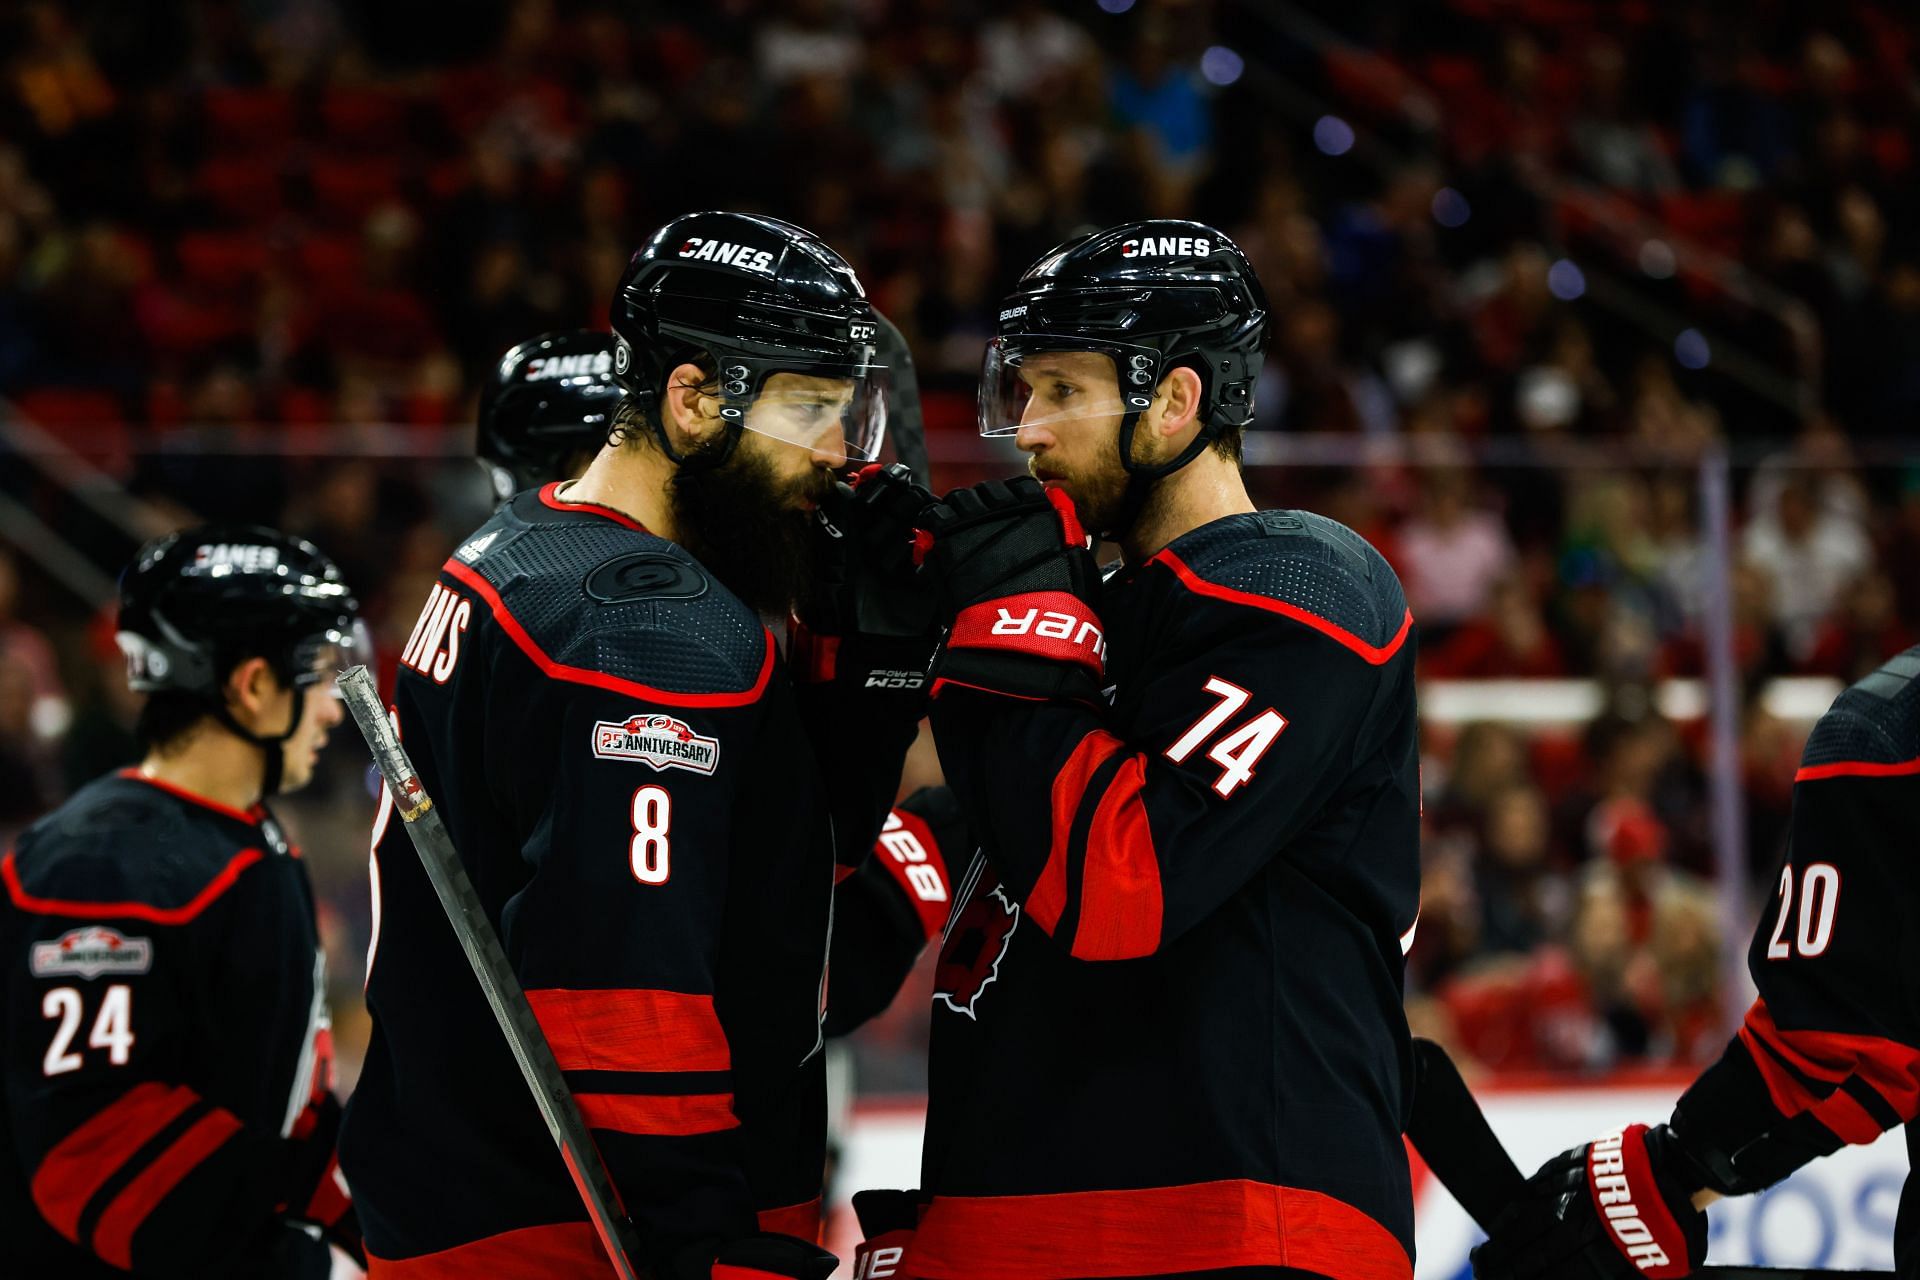 Jaccob Slavin and Brent Burns formed a formidable pair